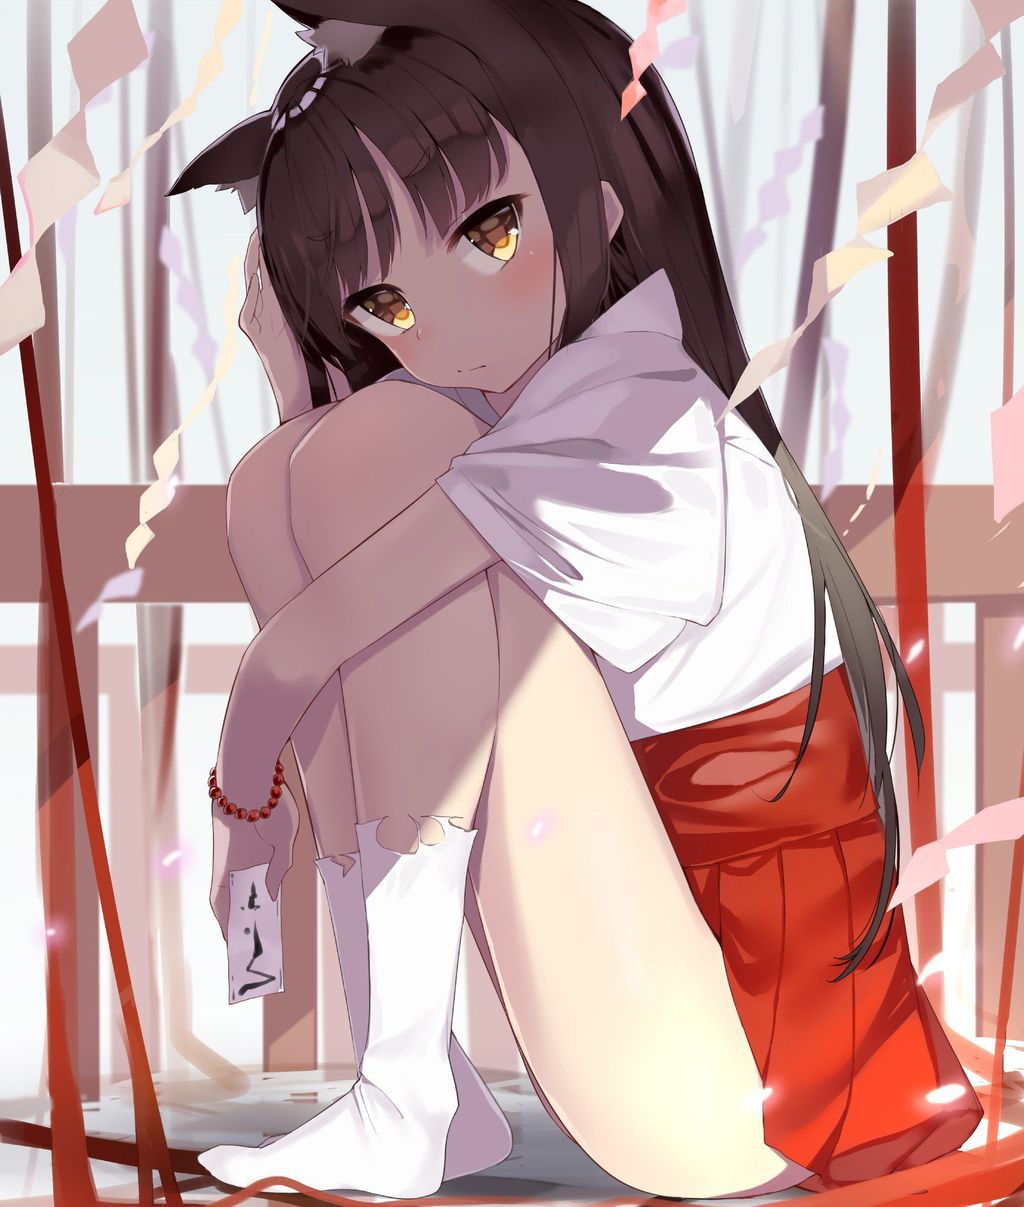 A shrine maiden is erotic, isn't she? 6